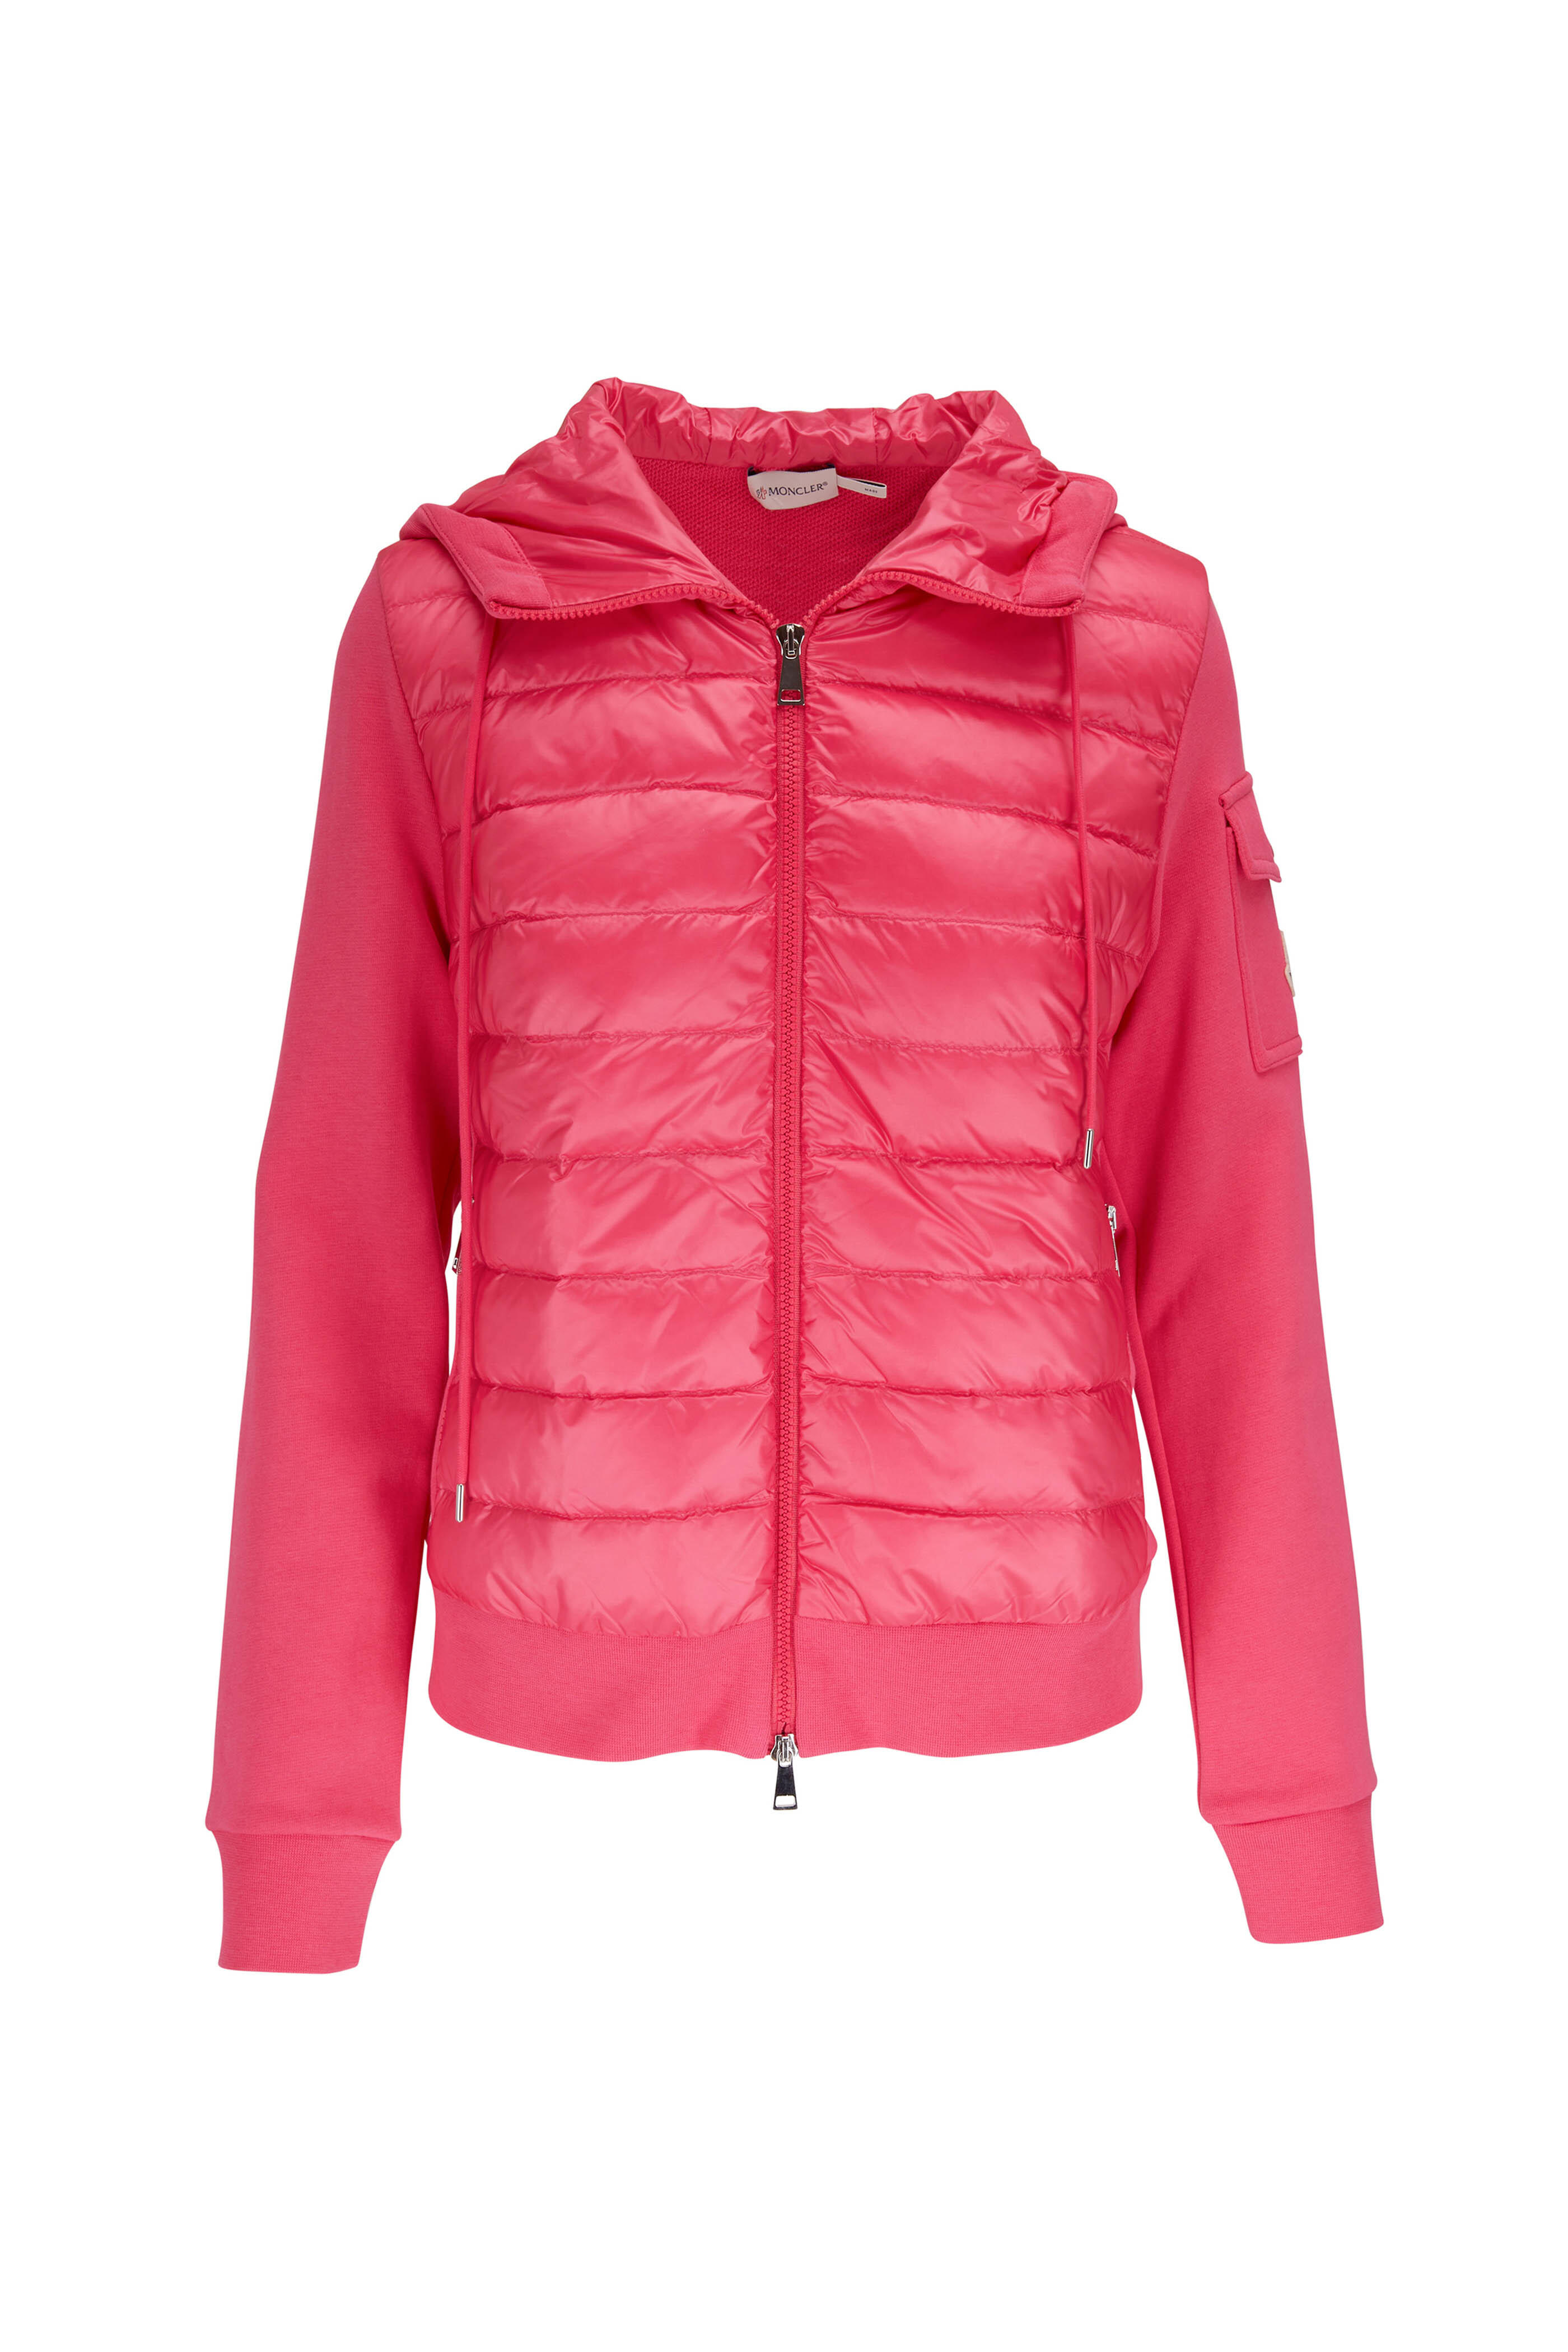 Moncler - Hot Pink Quilted Front Hooded Jacket | Mitchell Stores